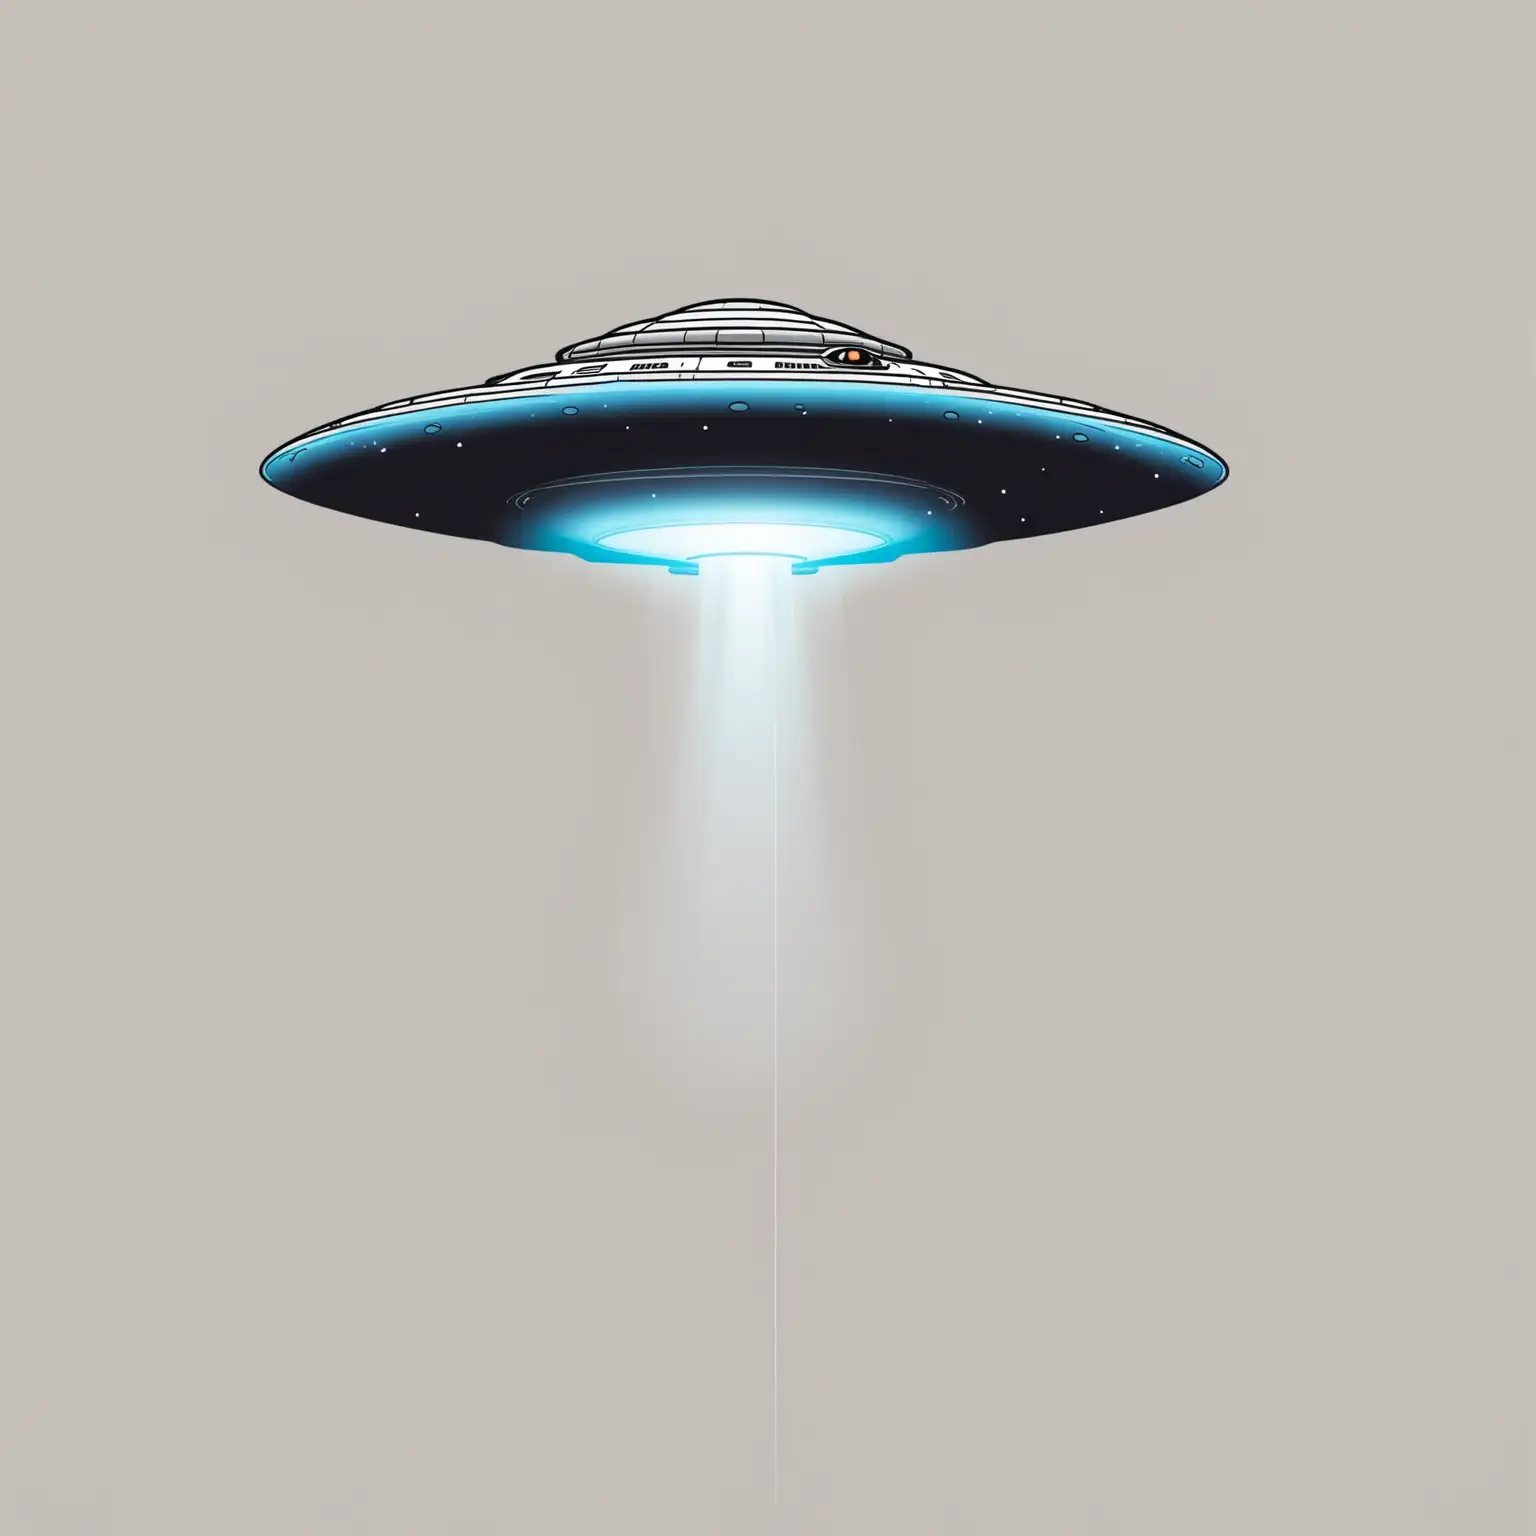 create an image of a ufo to the right with no background. NO BACKGROUND.